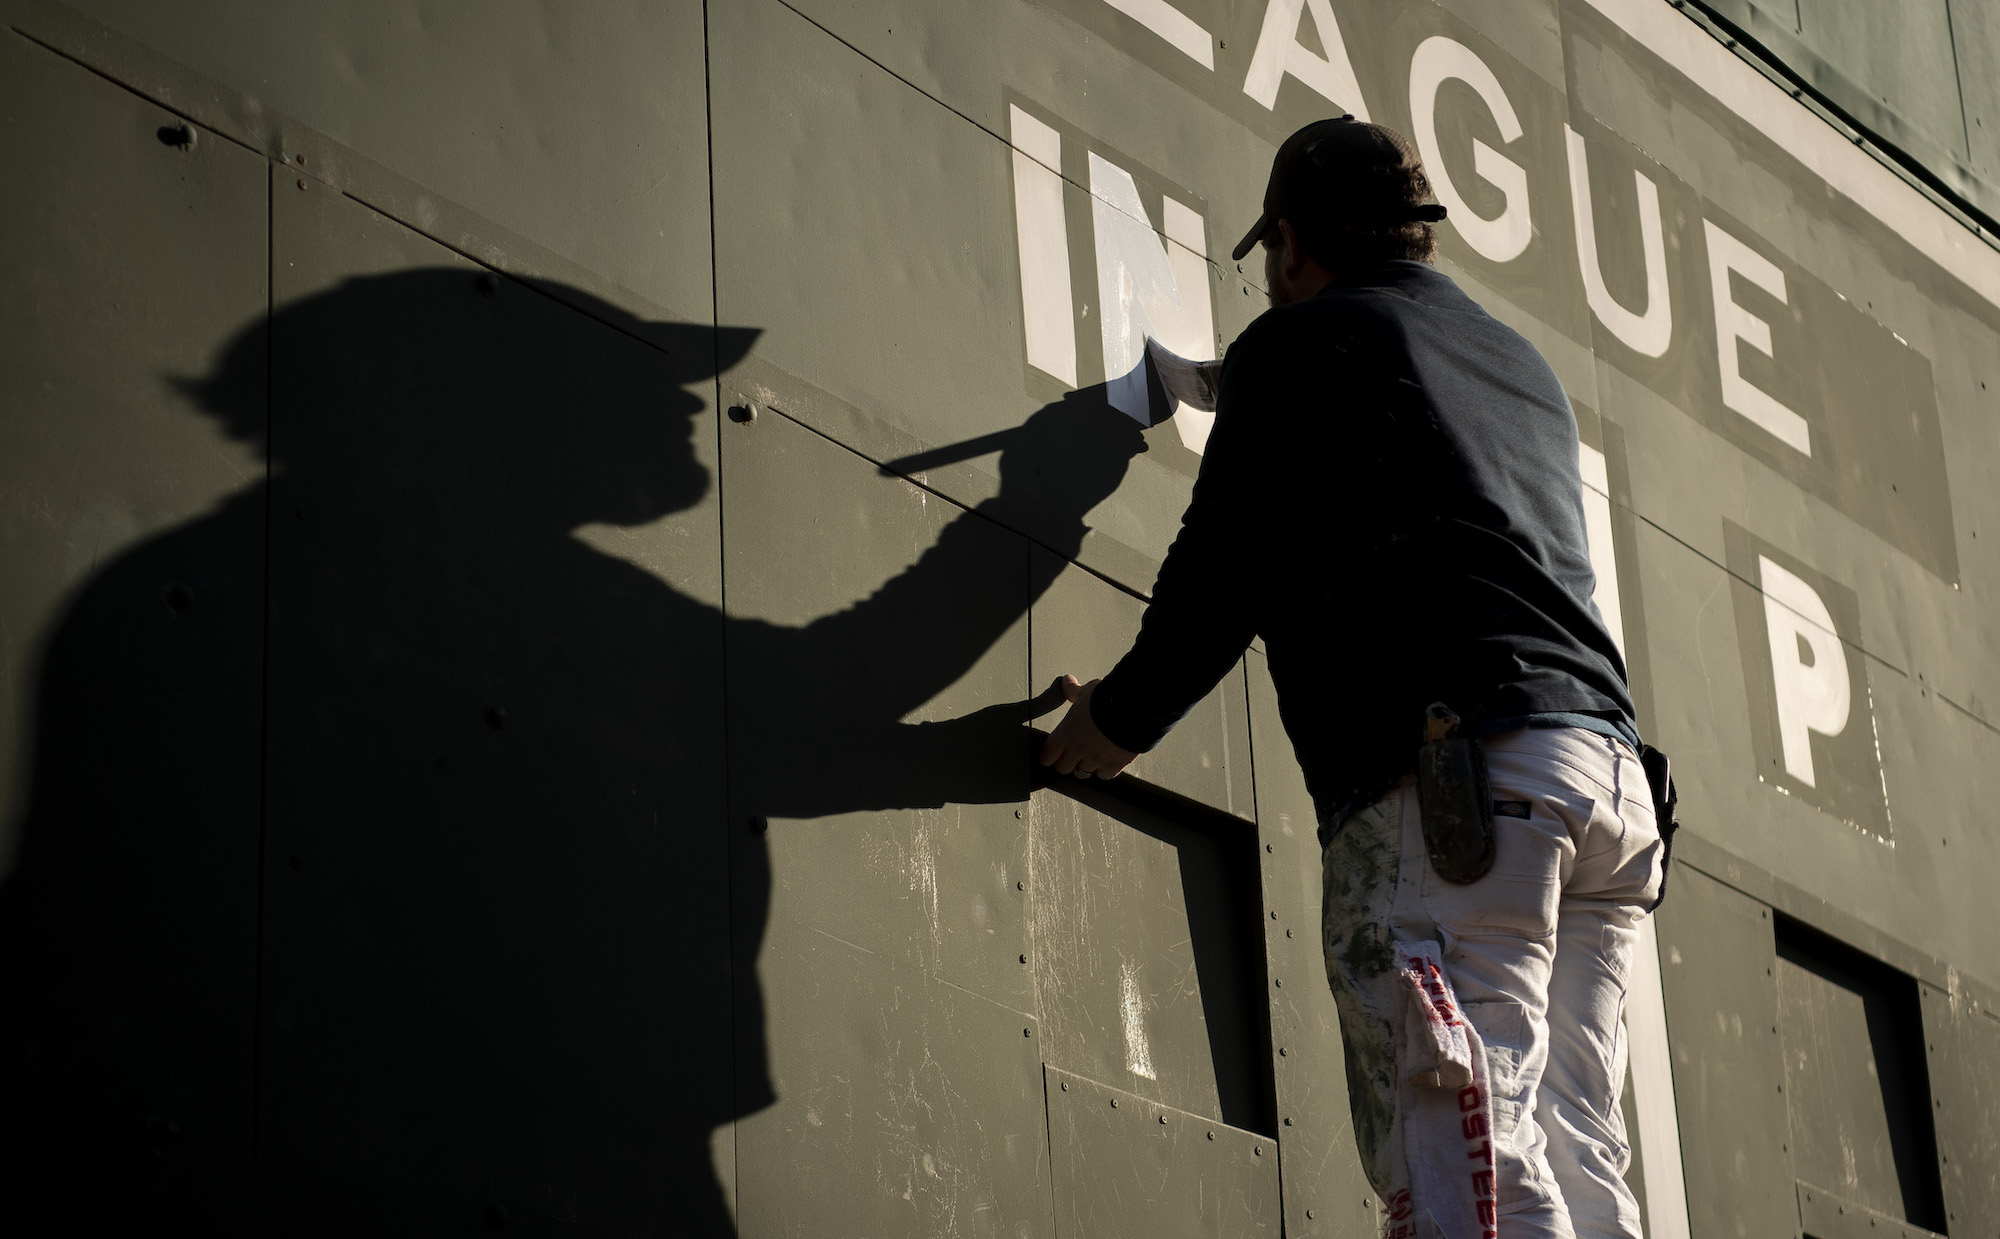 BOSTON, MASSACHUSETTS - MARCH 21: The Green Monster is painted ahead of 2023 MLB Opening Day on March 21, 2023 at Fenway Park in Boston, Massachusetts. (Photo by Maddie Malhotra/Boston Red Sox/Getty Images) *** Local Caption ***